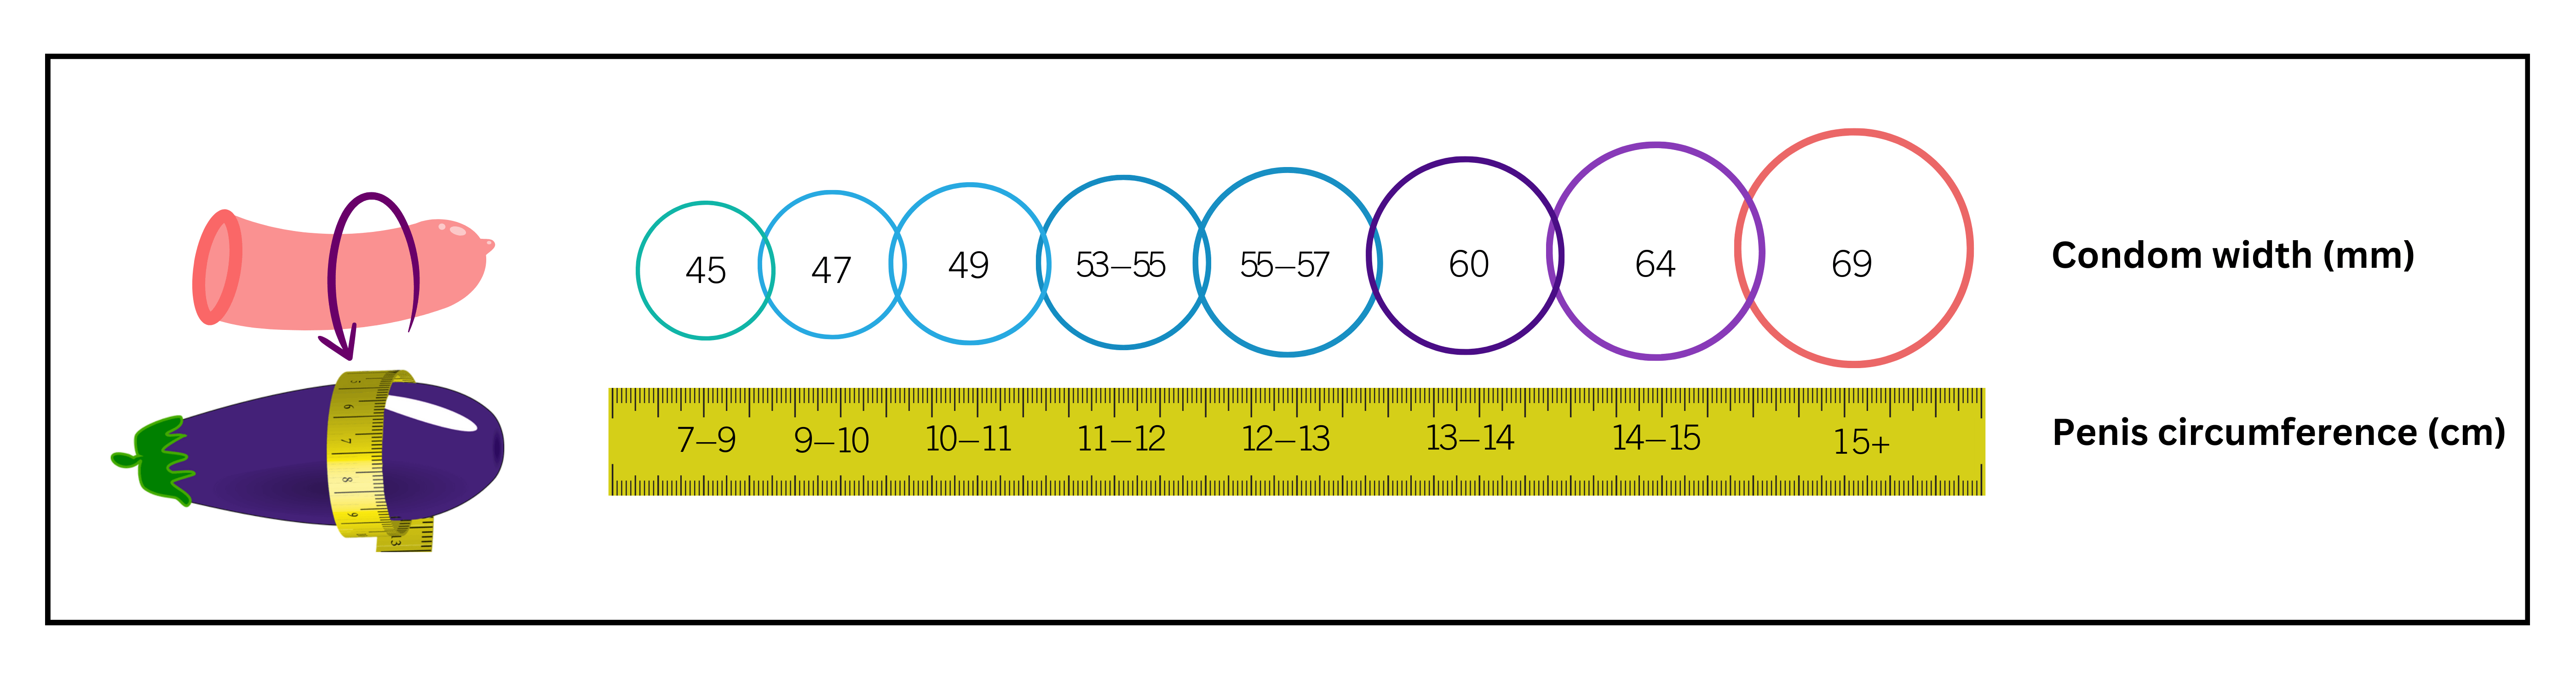 Infographic displaying various condom sizes and corresponding measurements